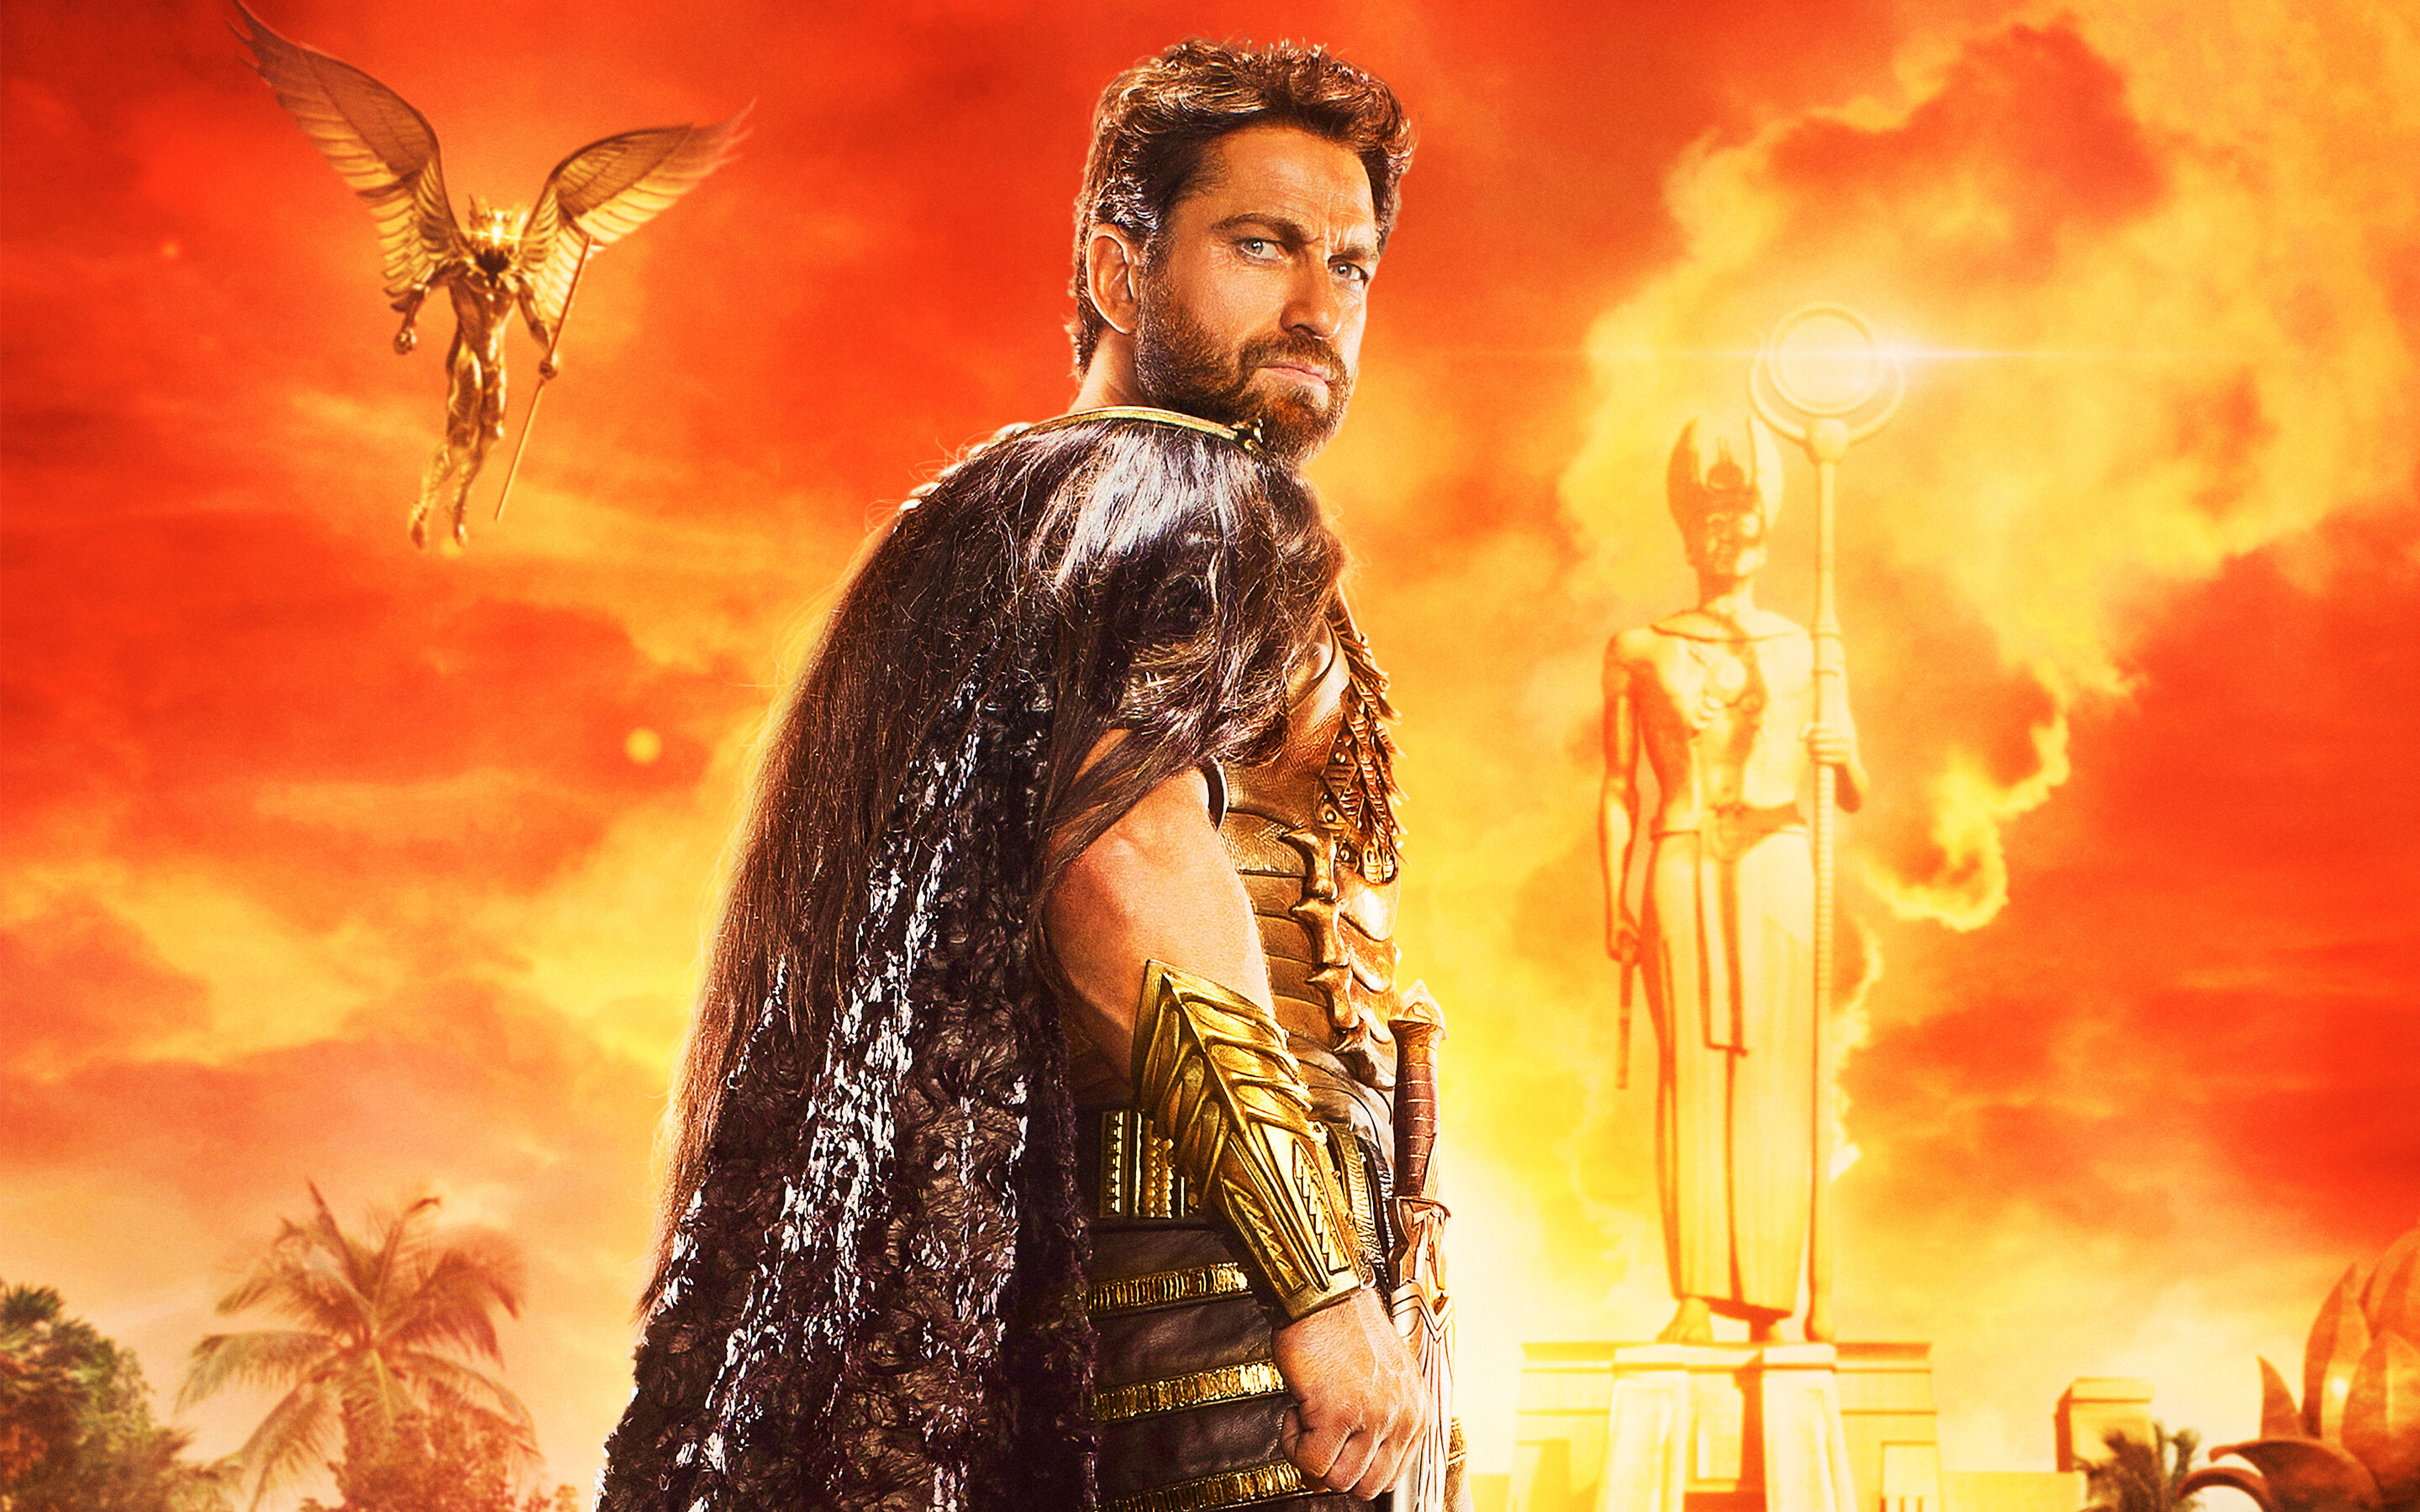 Gods of Egypt (Movie): Gerard Butler as Set, The deity of the desert, Brother of Osiris, Husband of Nephthys. 2880x1800 HD Wallpaper.